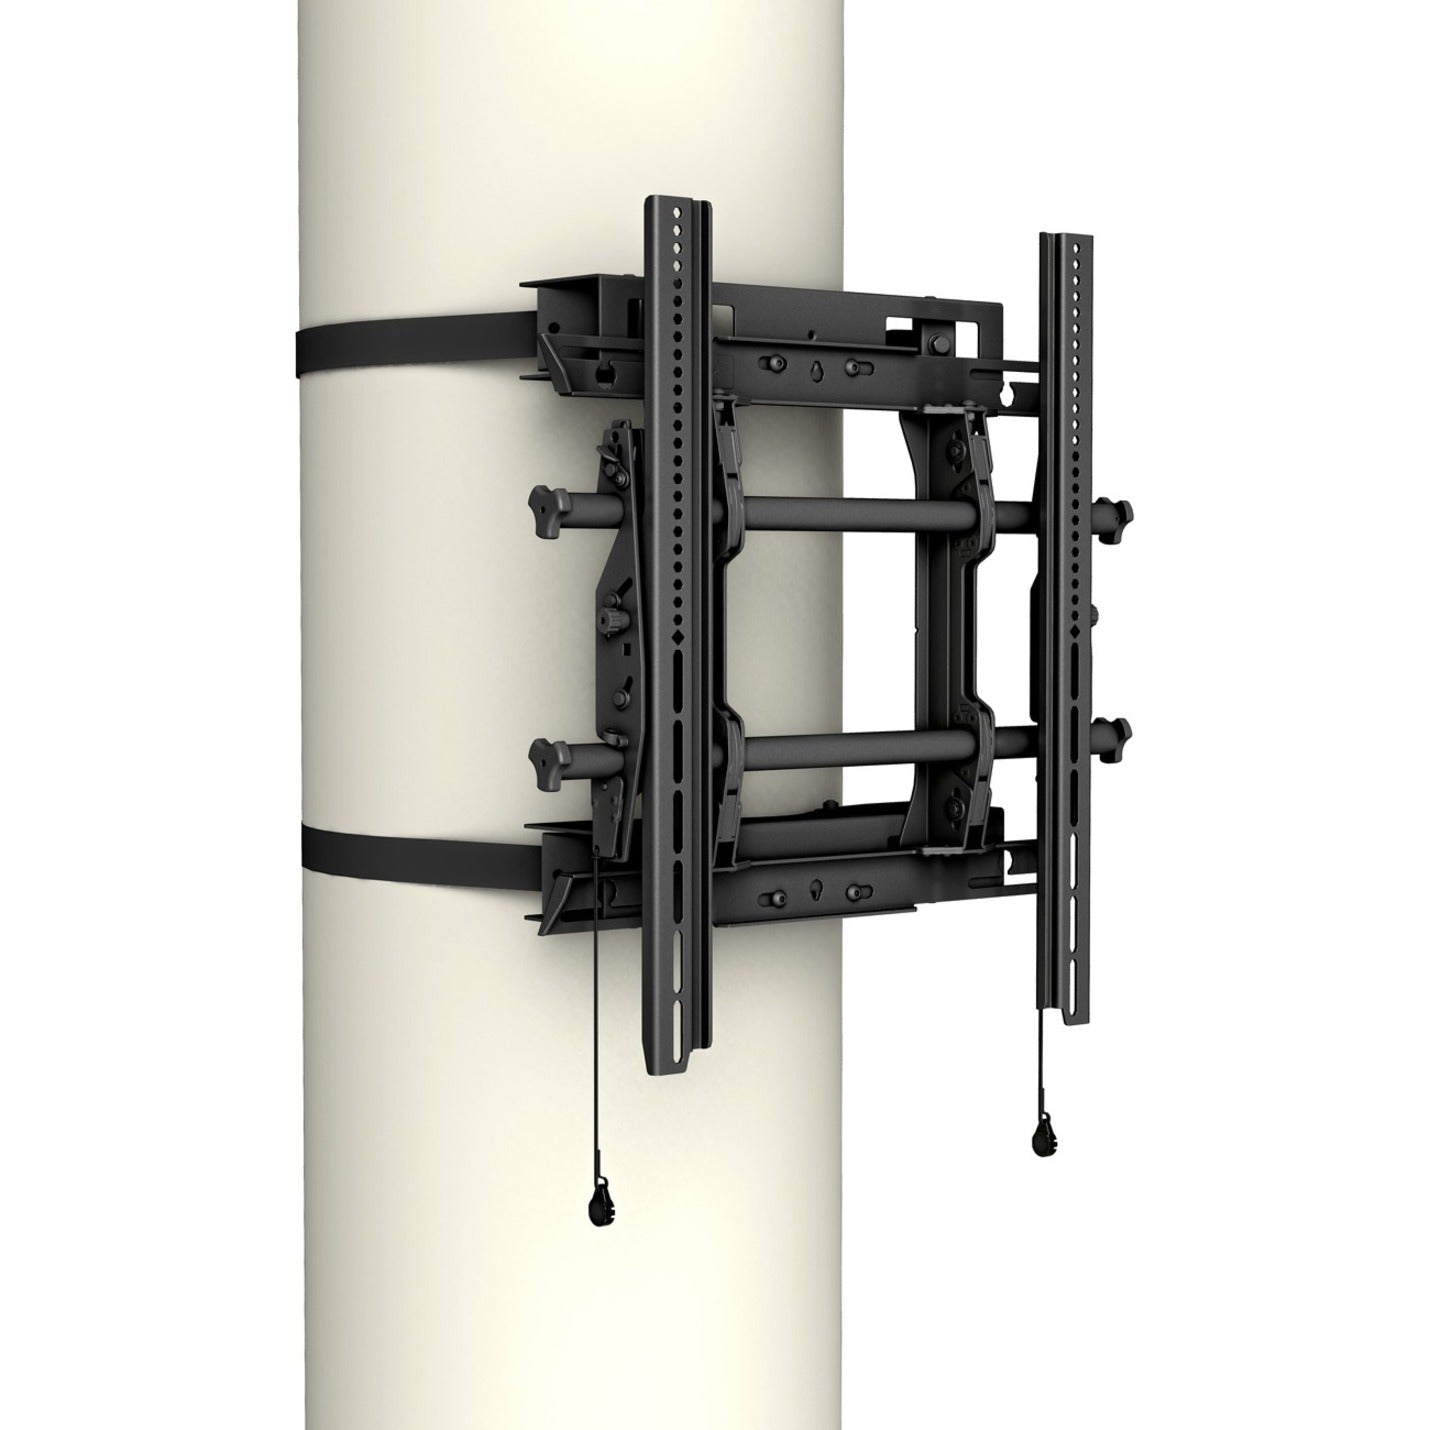 Chief FCASCA Structural Column Adapter Wall Mount - Black, Landscape